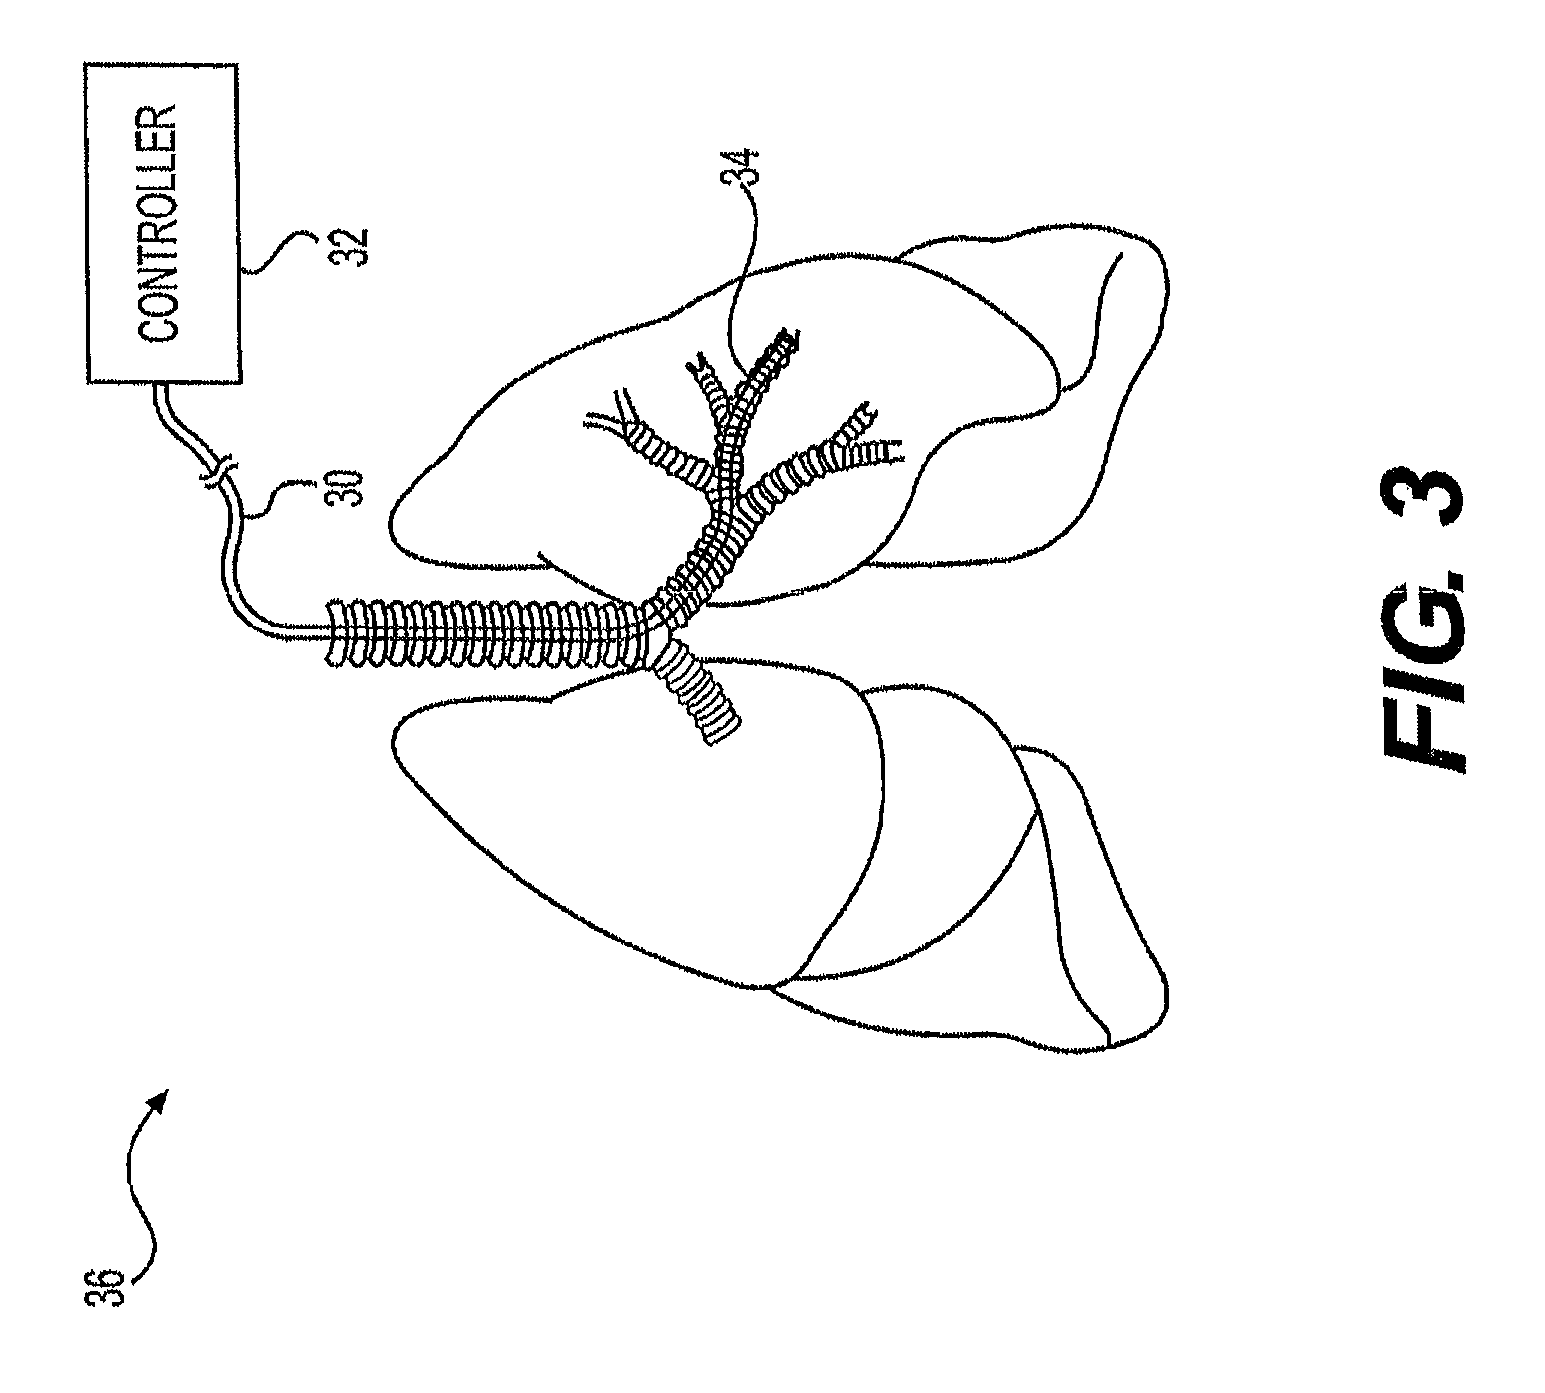 Airway diagnosis and treatment devices and related methods of use